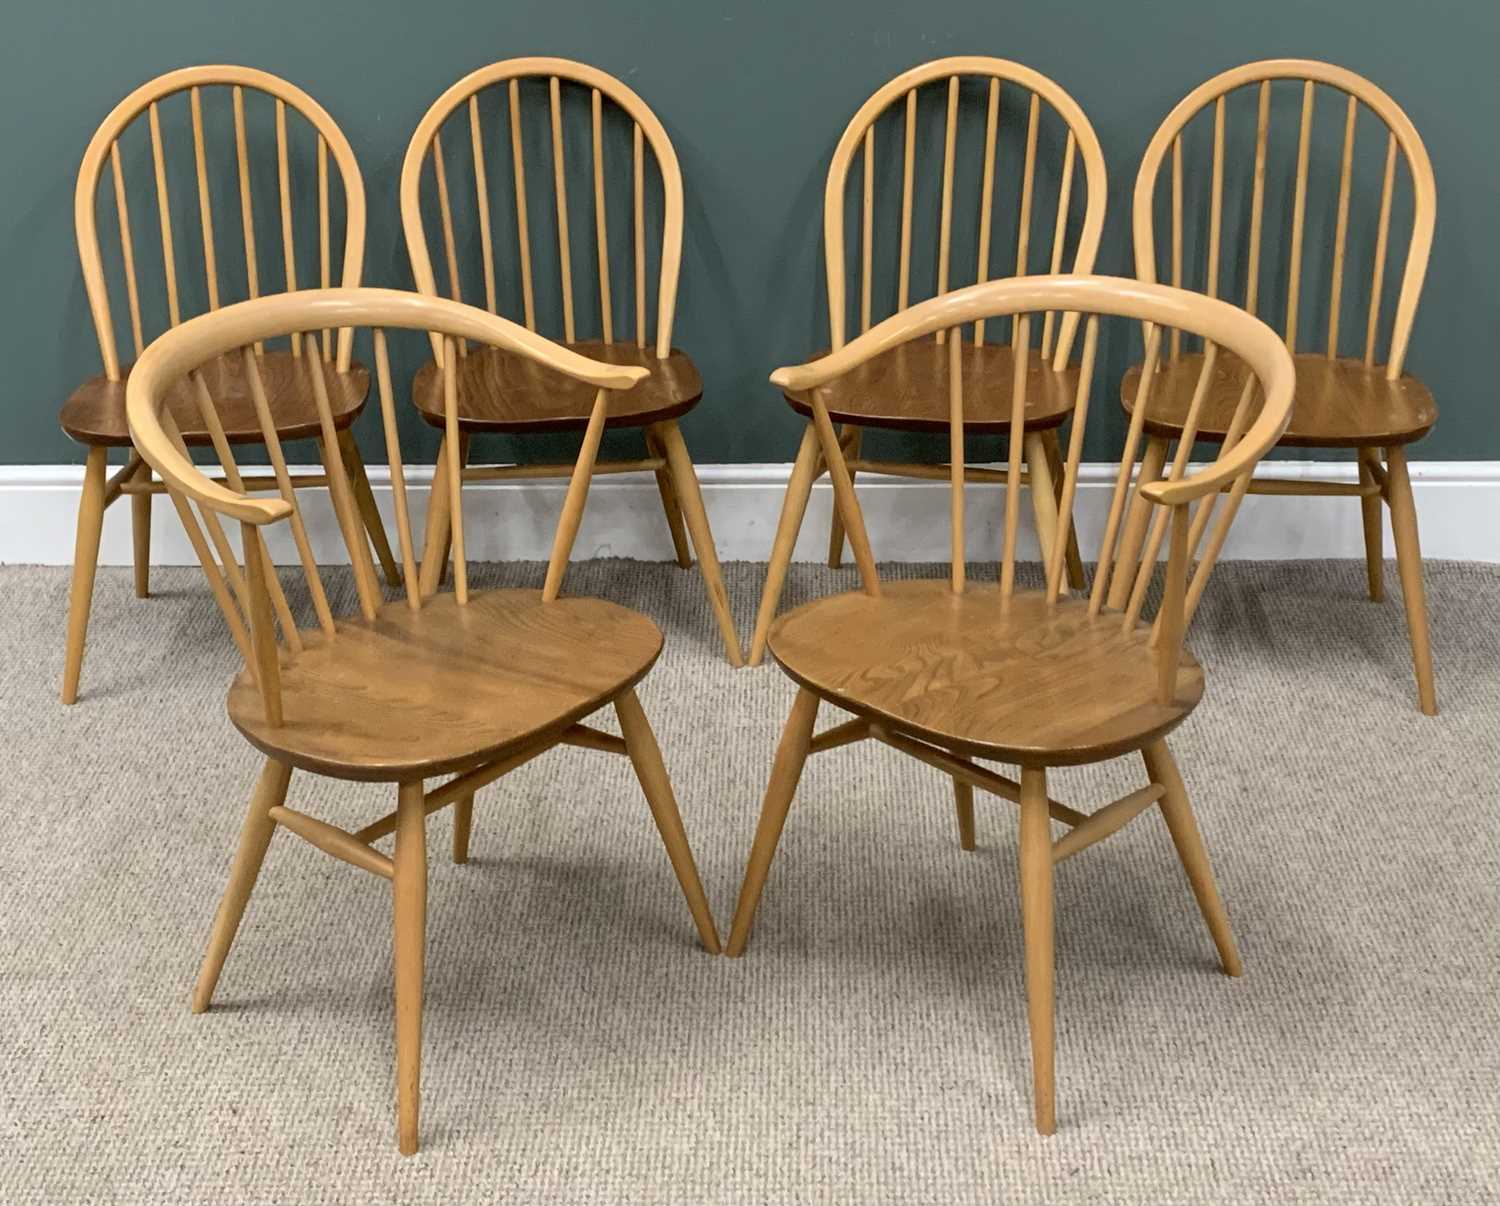 LIGHT ERCOL DINING CHAIRS, four with hoop and spindle back and a pair of tub shaped spindle back